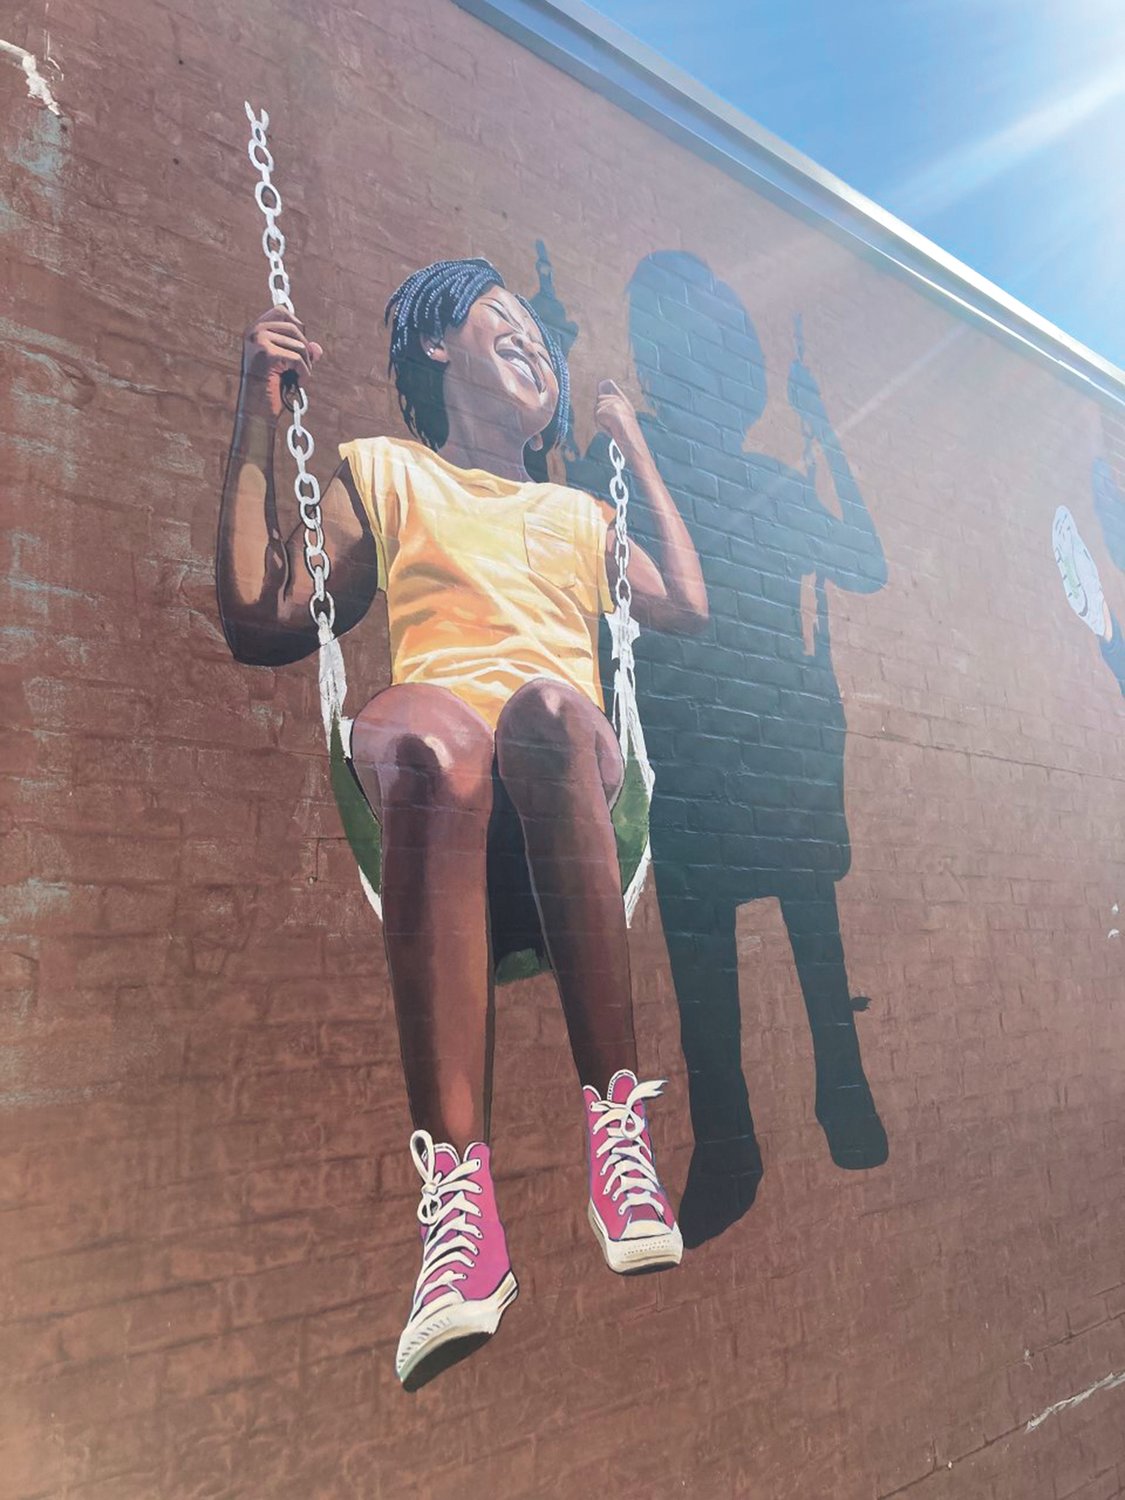 NEW MURALS: Three murals are currently being worked on in different alleyways at Garden City. All three murals are located in the section of the center that holds Francesca’s and the Gap; local artists are creating the works. (Cranston Herald photo)